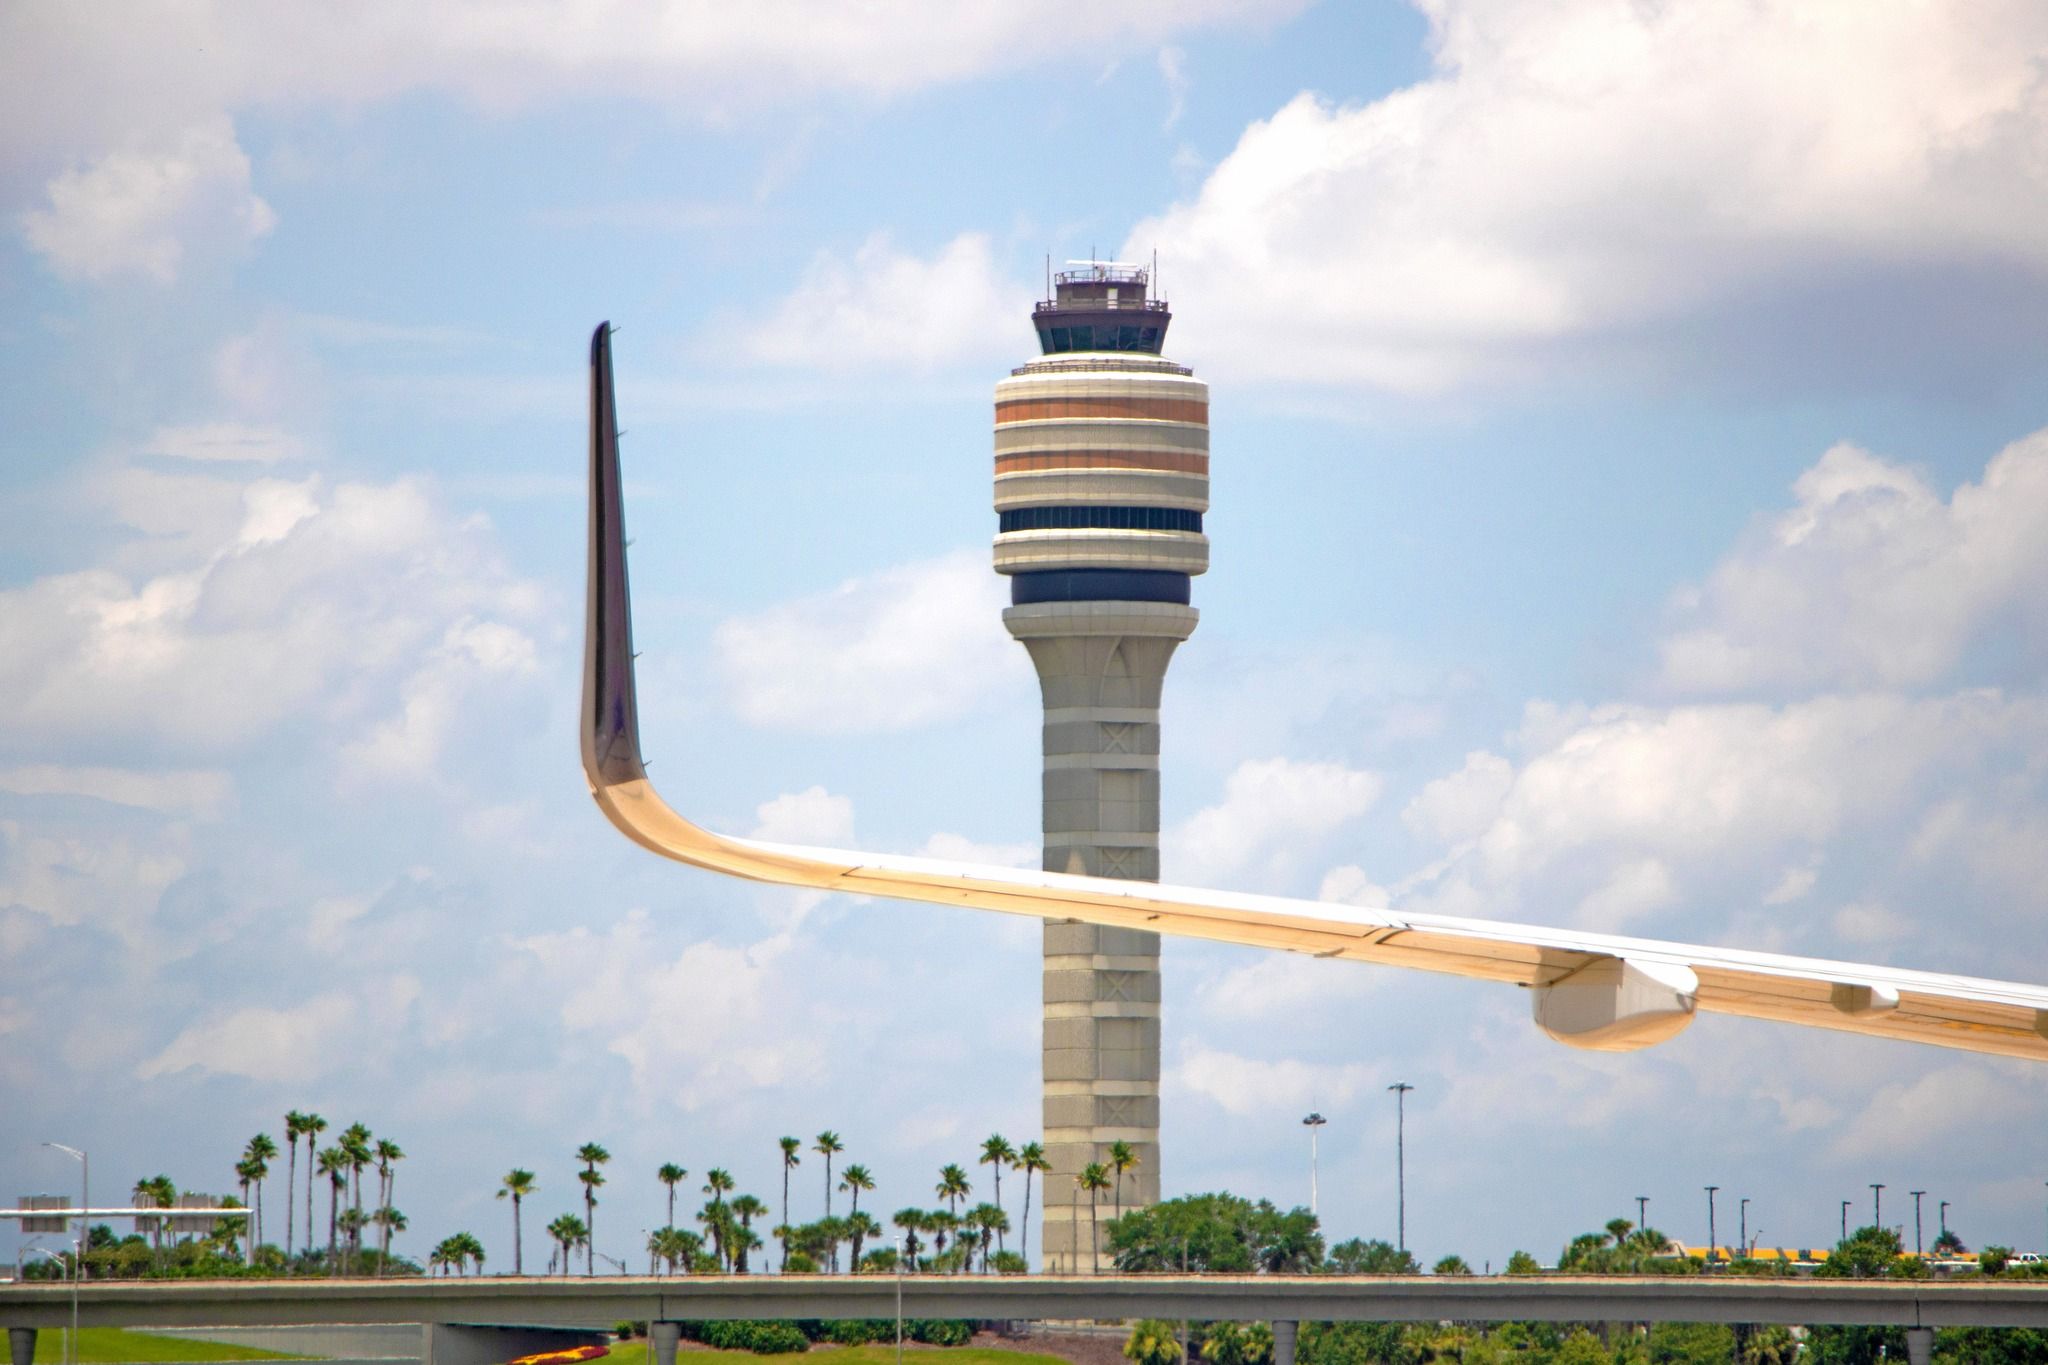 MCO aircraft and tower